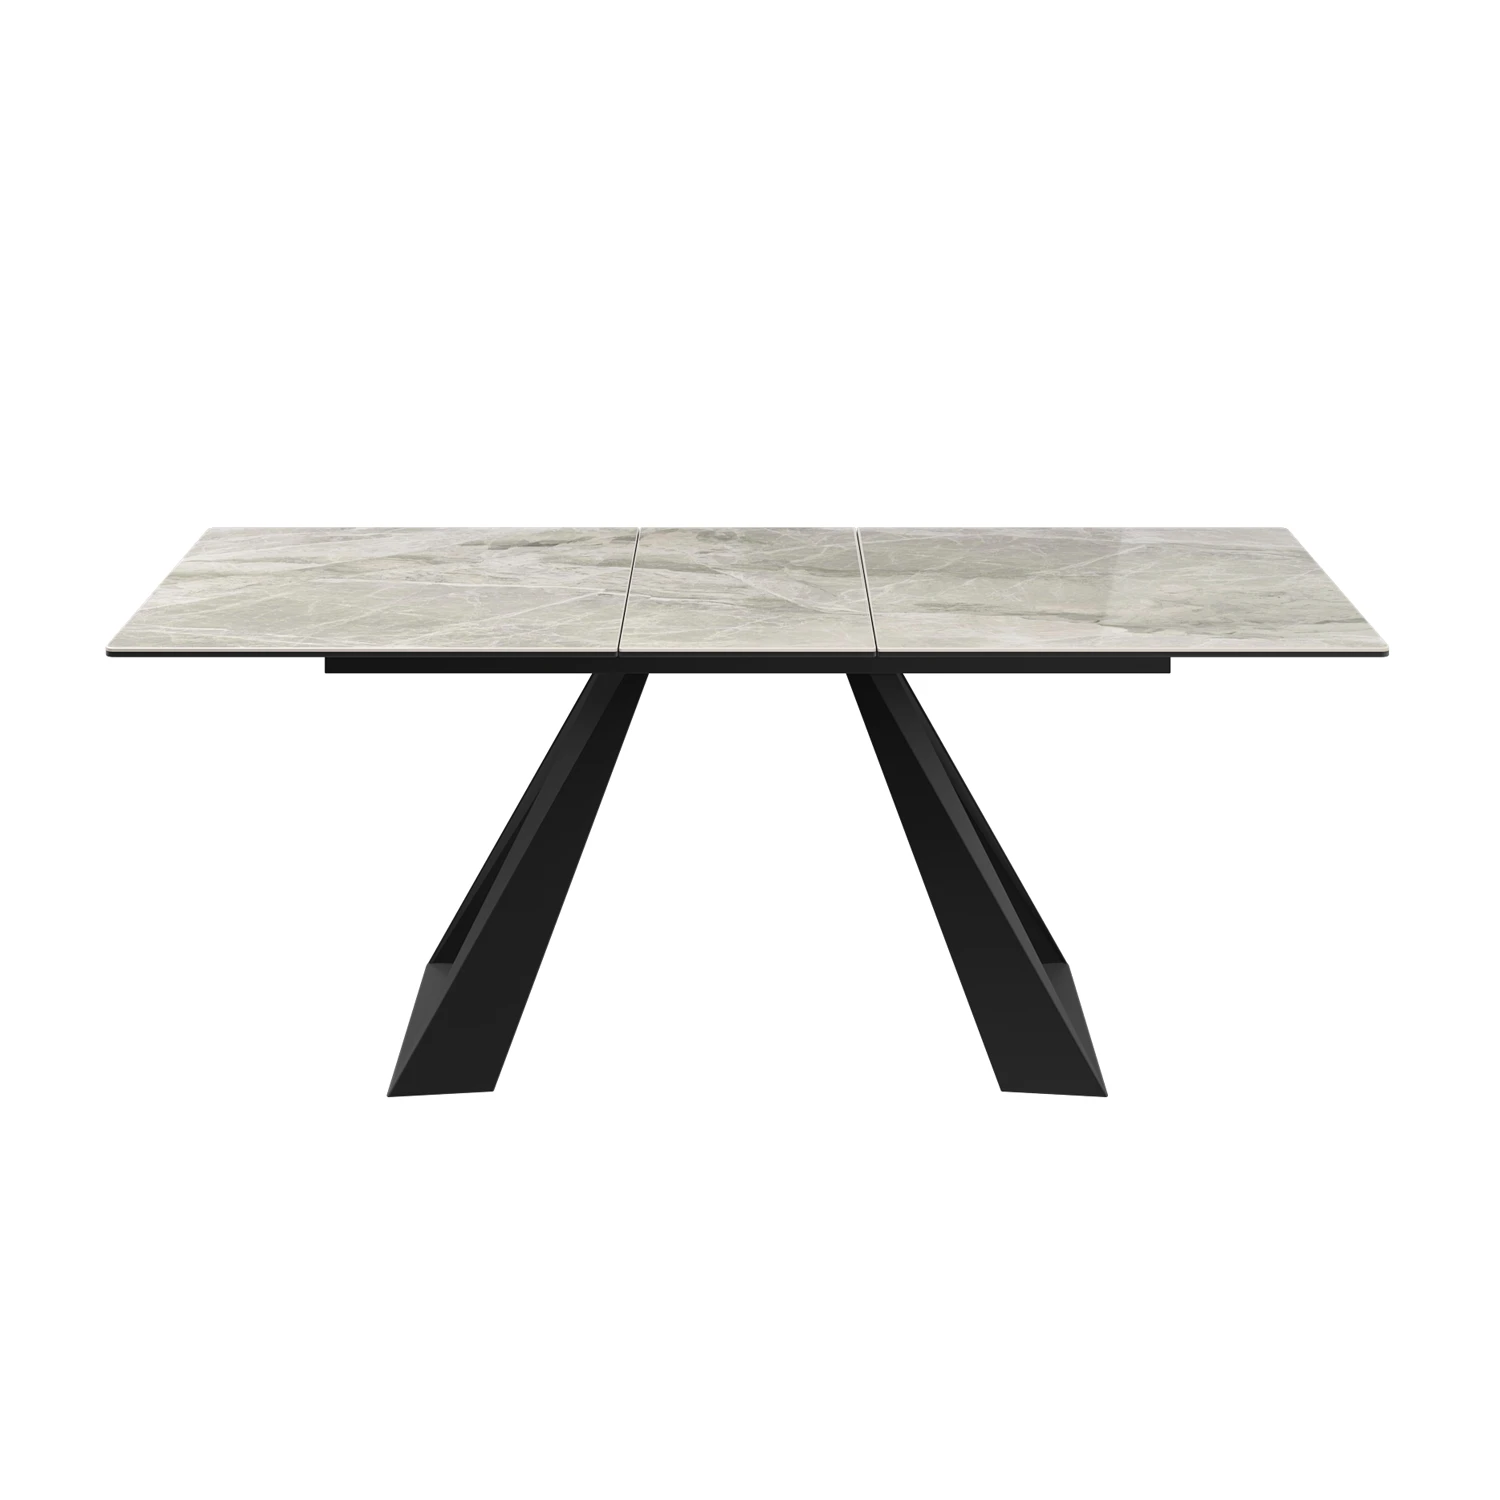 Vortex 160-200cm Grey Gloss Ceramic Extending Dining Table With Twist Dining Chairs